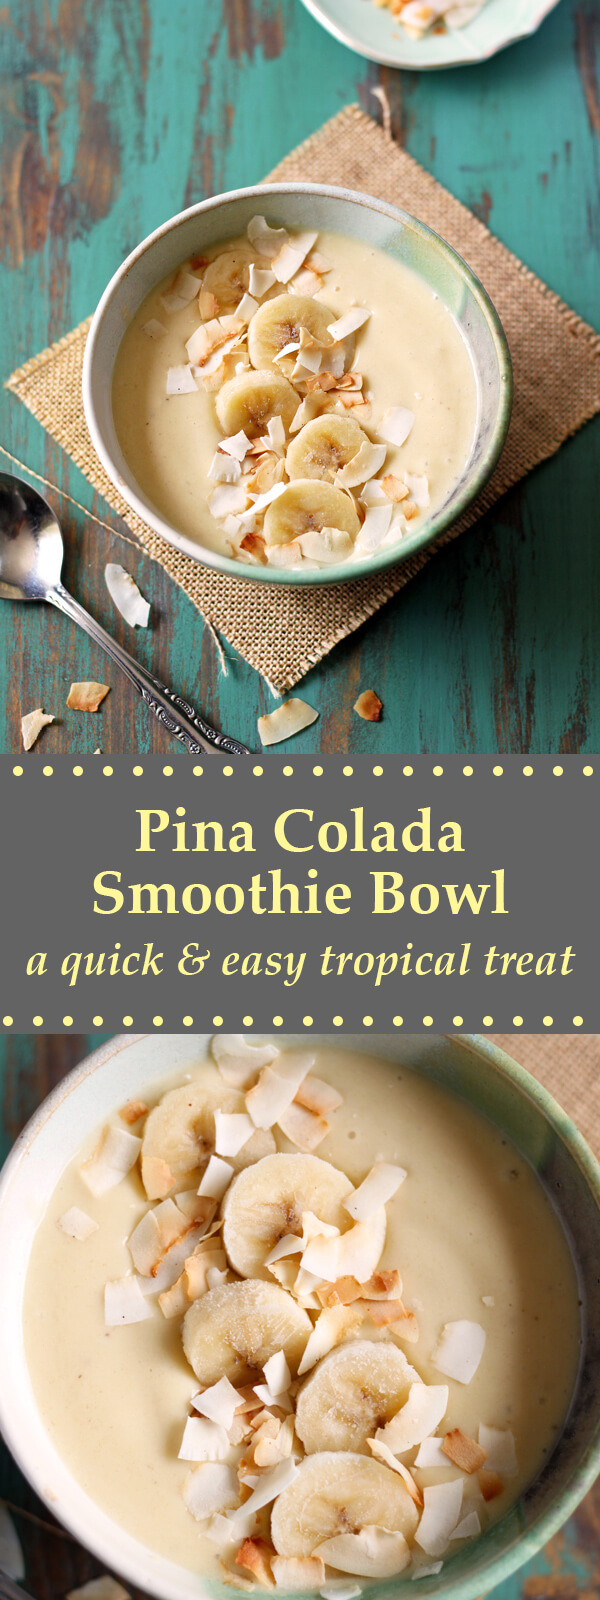 This easy Pina Colada Smoothie Bowl (minus the rum) is a healthy and tropical breakfast that will take you to the island in a spoon! | wildwildwhisk.com